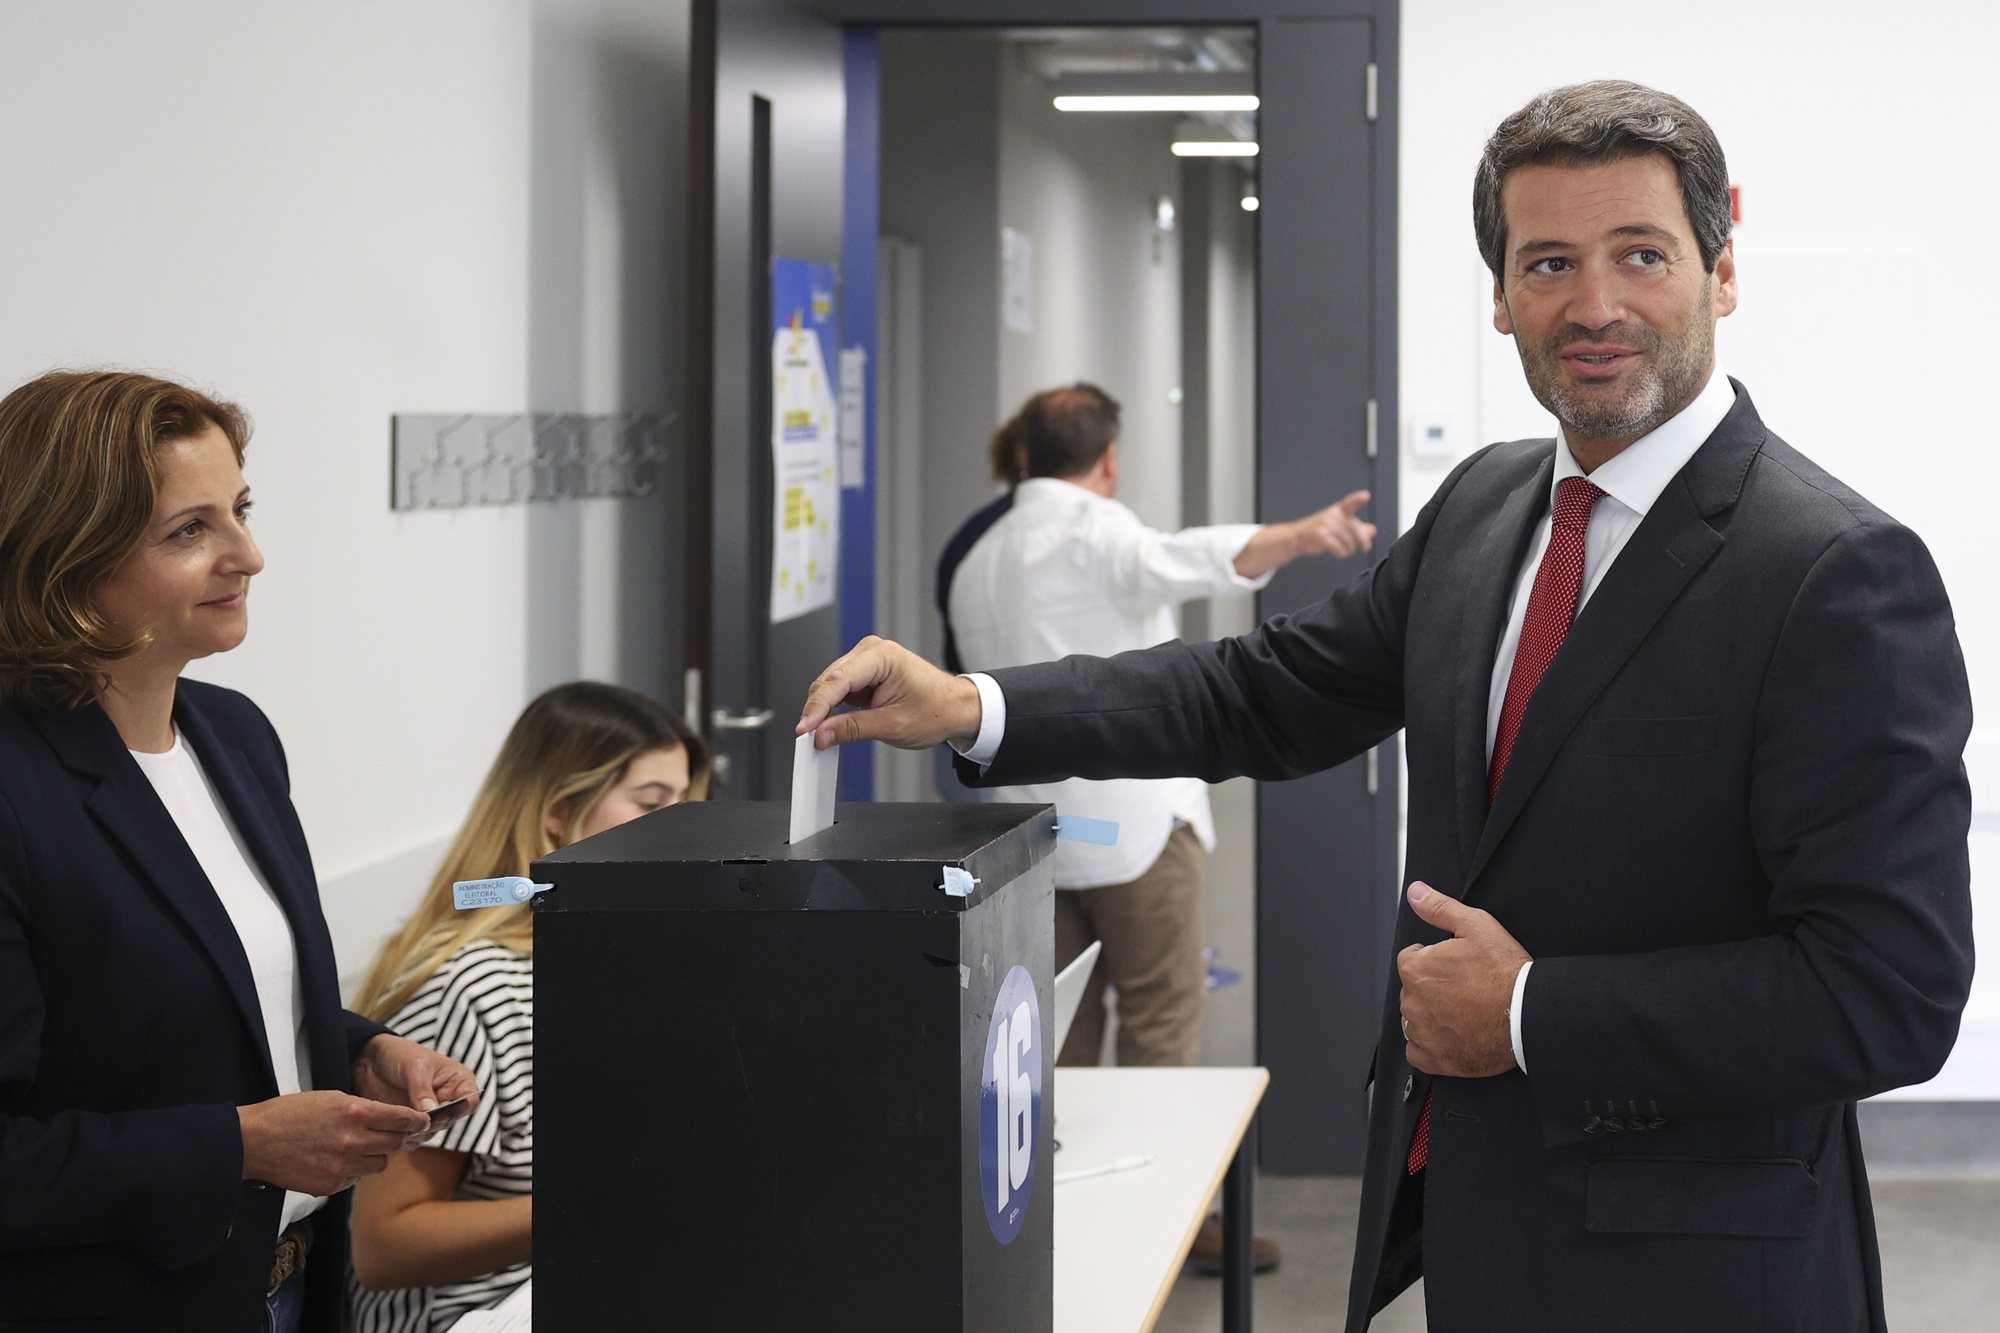 Chega (CH) President Andre Ventura (R) cast his ballot for the European Elections at a polling station in Lisbon, Portugal, 09 June 2024. More than 10.8 million registered voters in Portugal and abroad go to the polls today to choose 21 of the 720 members of the European Parliament. ANTONIO COTRIM/LUSA